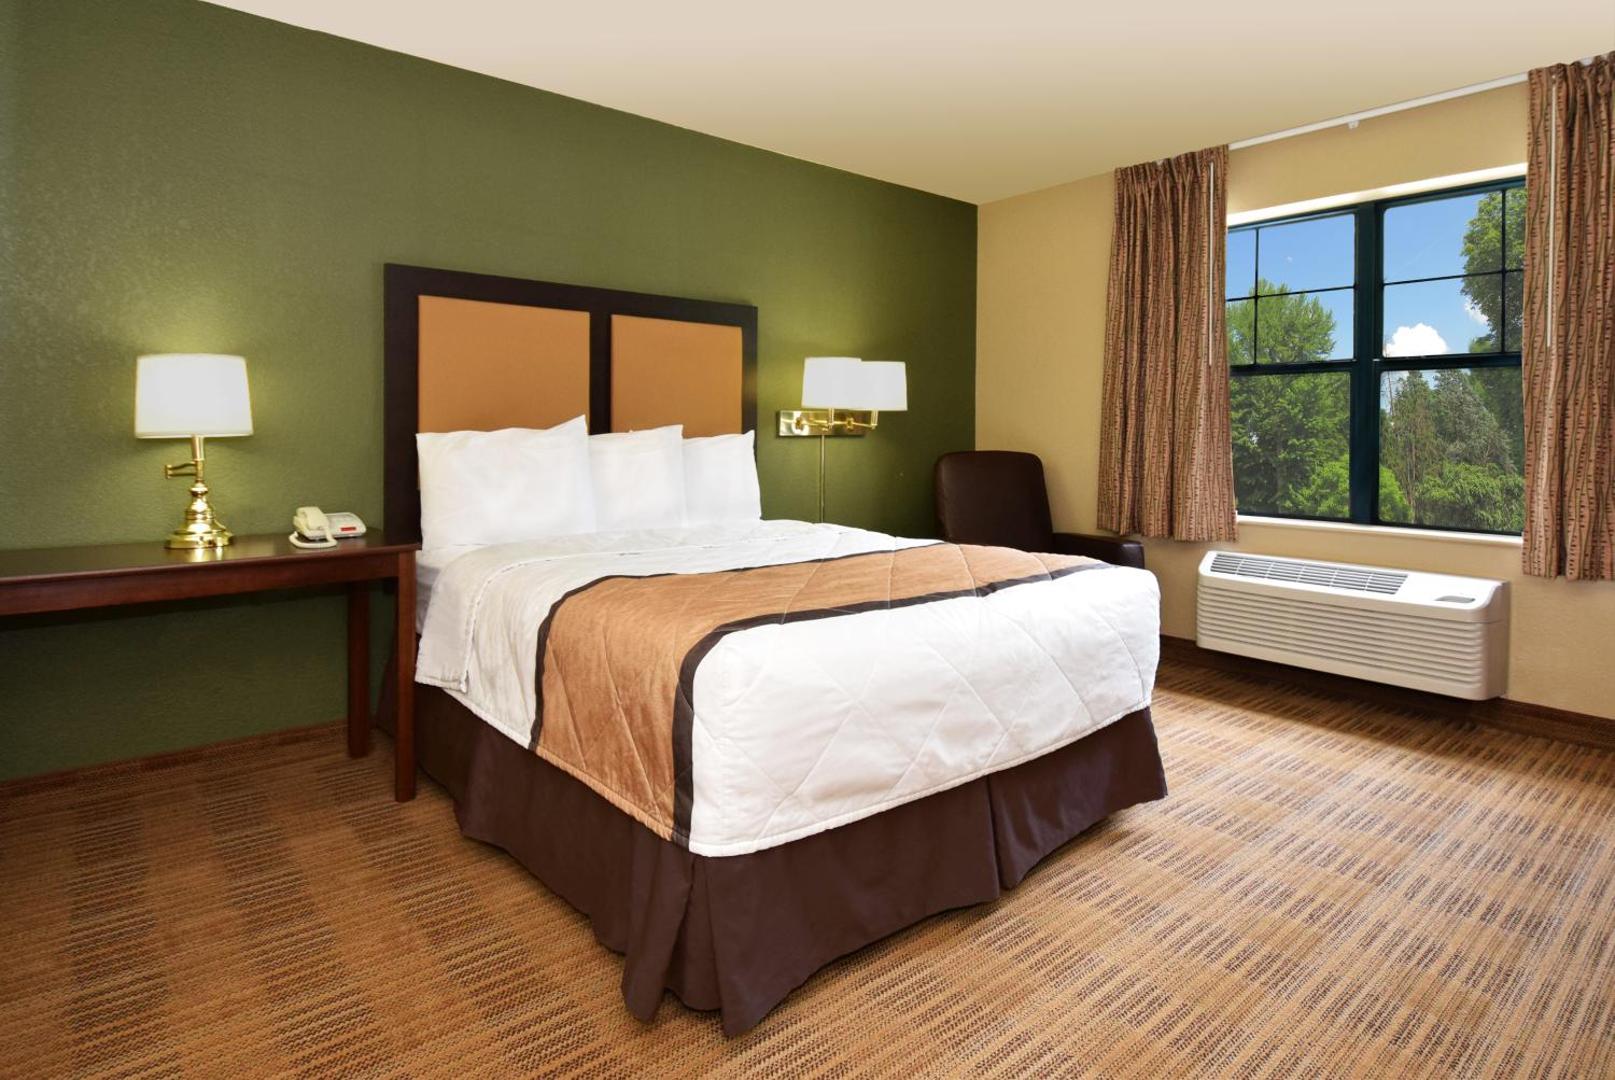 Extended Stay America - Salt Lake City - West Valley Center